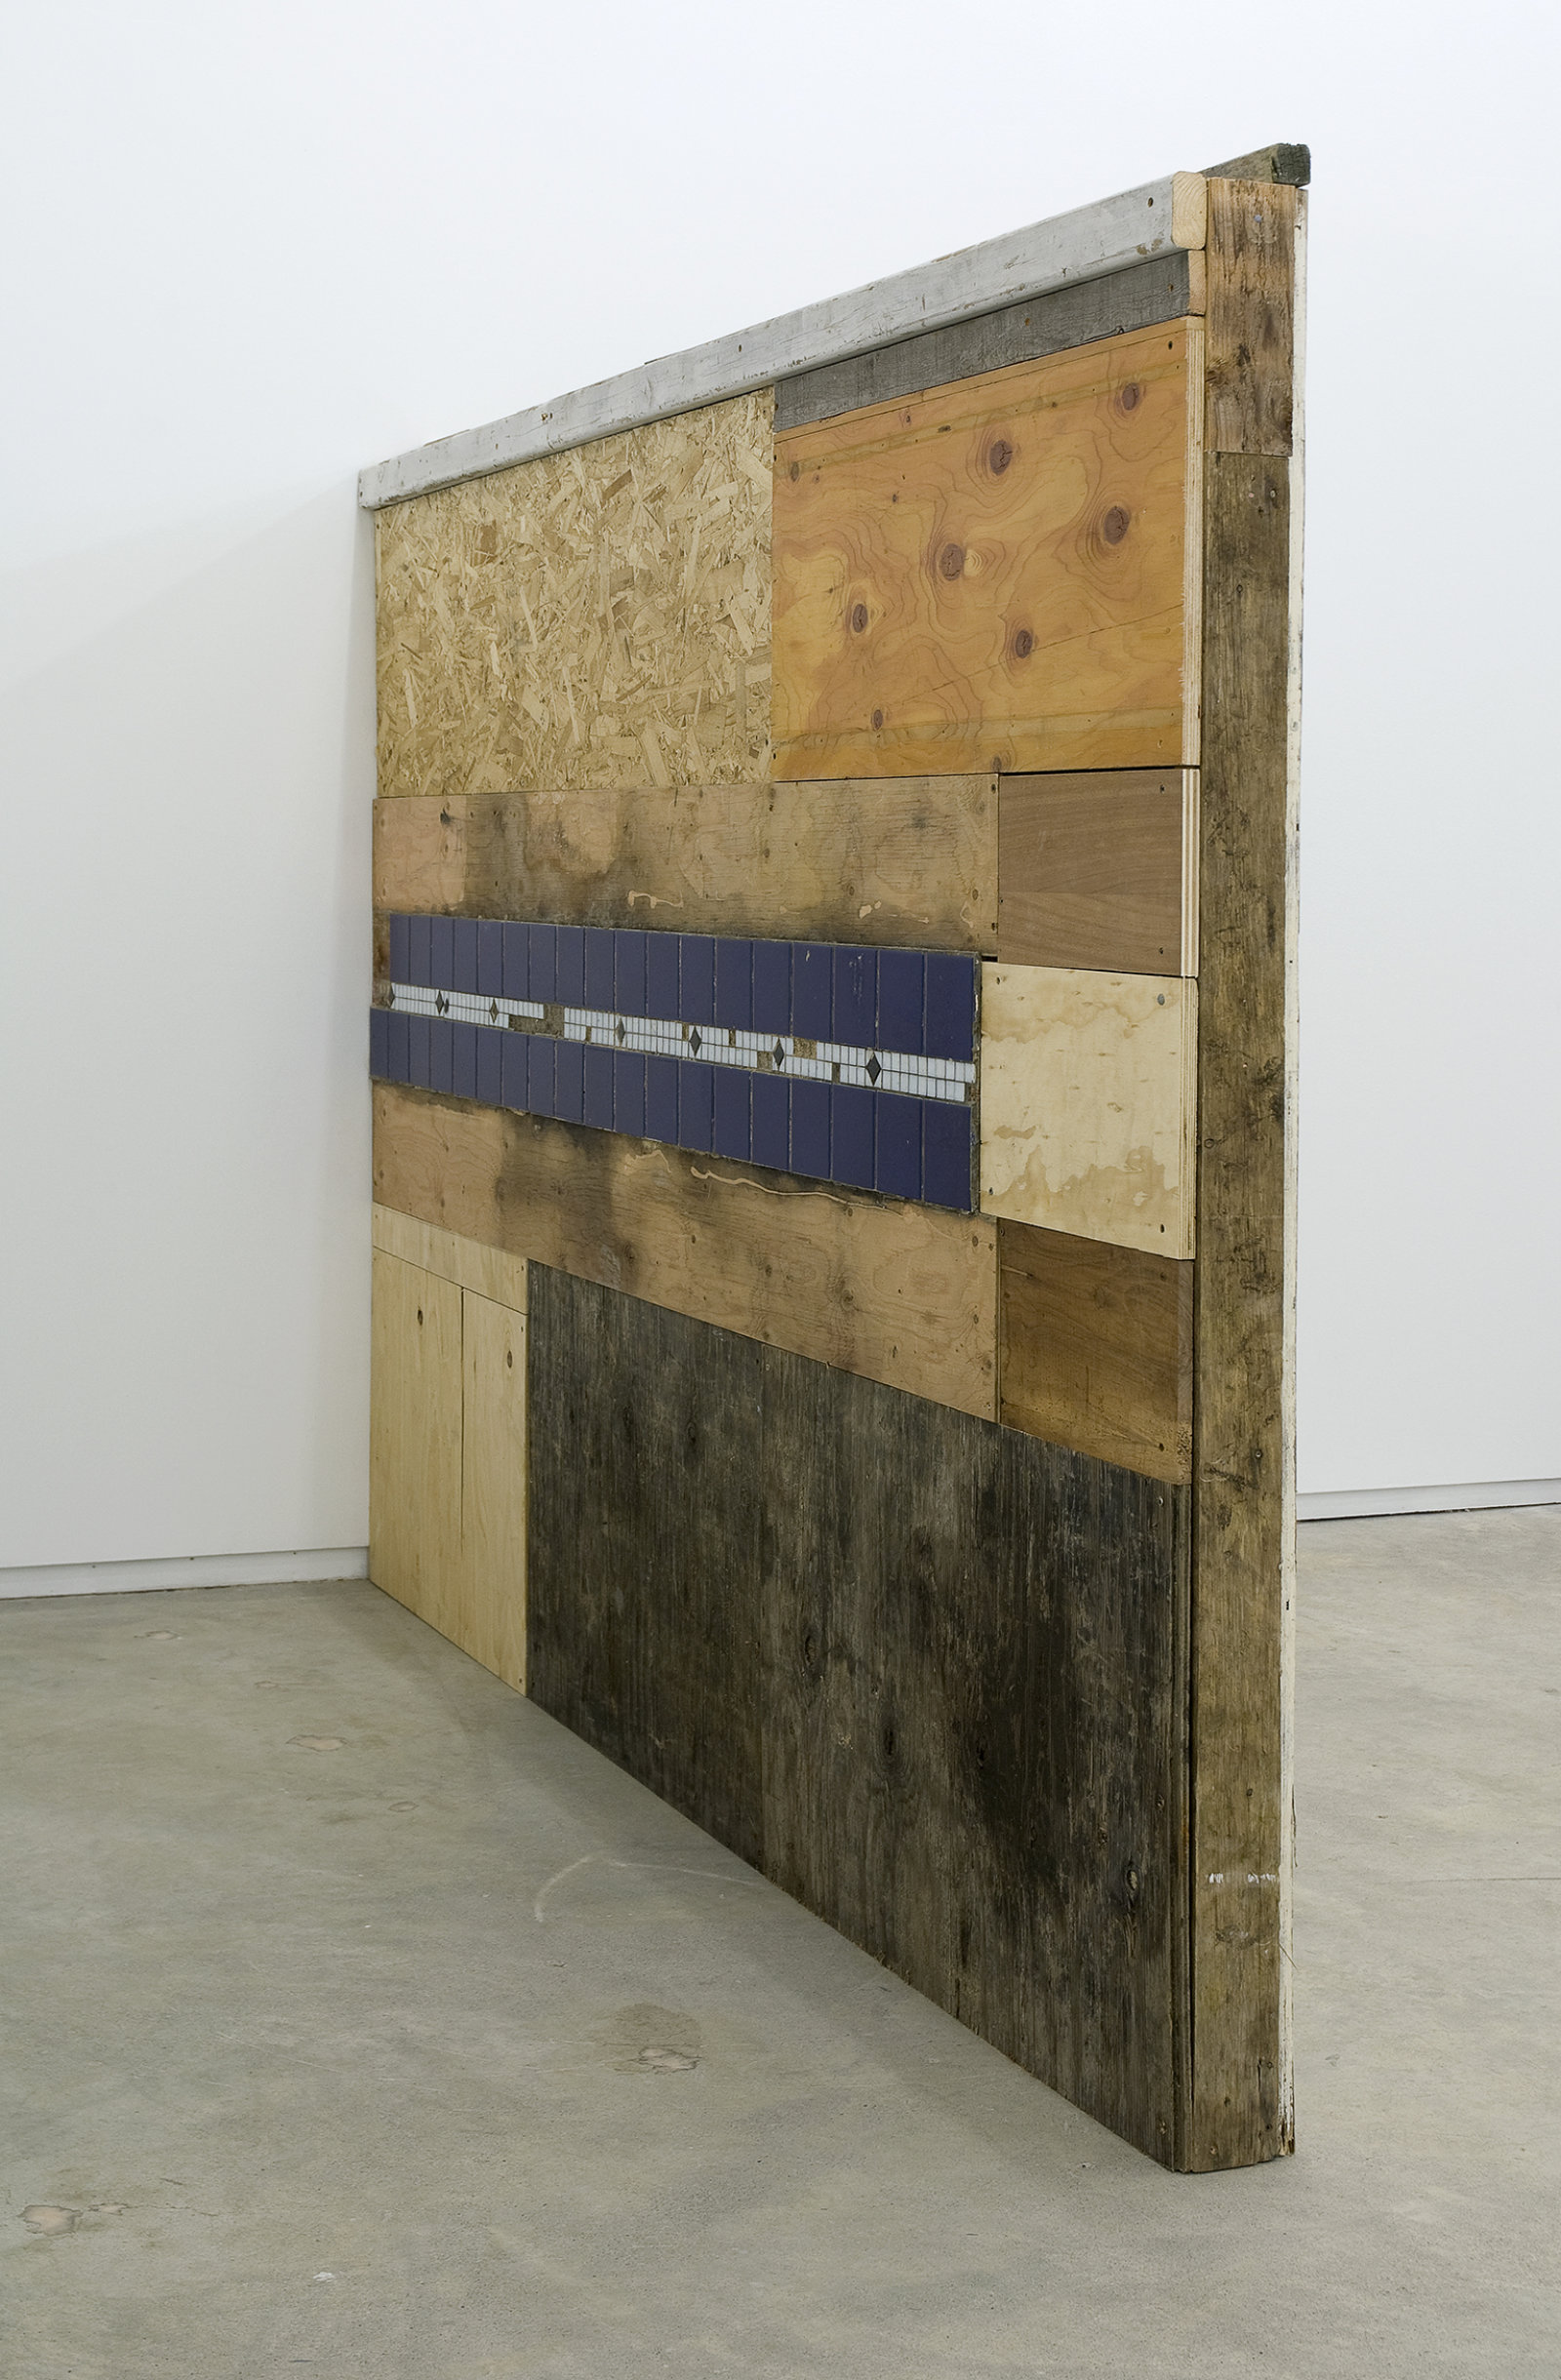 Ashes Withyman, Piss Wall from Uncertain Pilgrimage, 2009, found wood, tile, 73 x 100 x 5 in. (186 x 253 x 13 cm) 